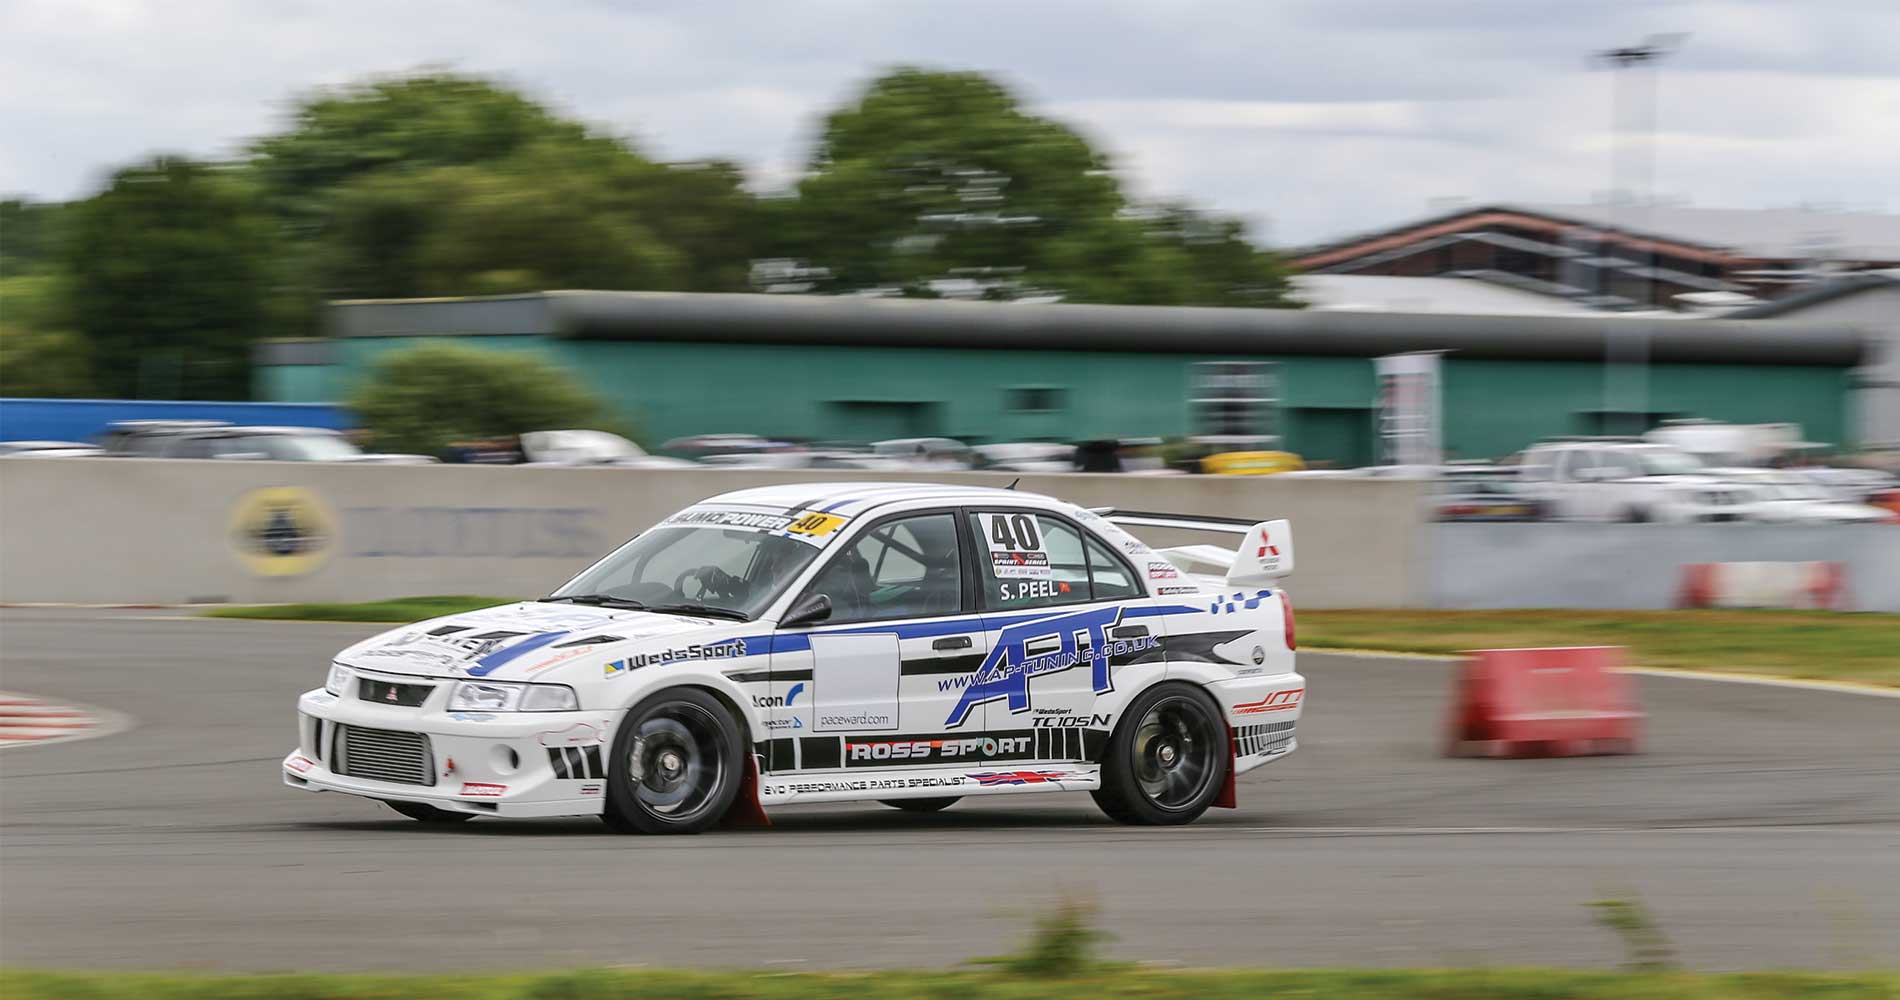 2016-pace-ward-mlr-sprint-series-round-6-cadwell-park-report-motorsportday-track-day-3